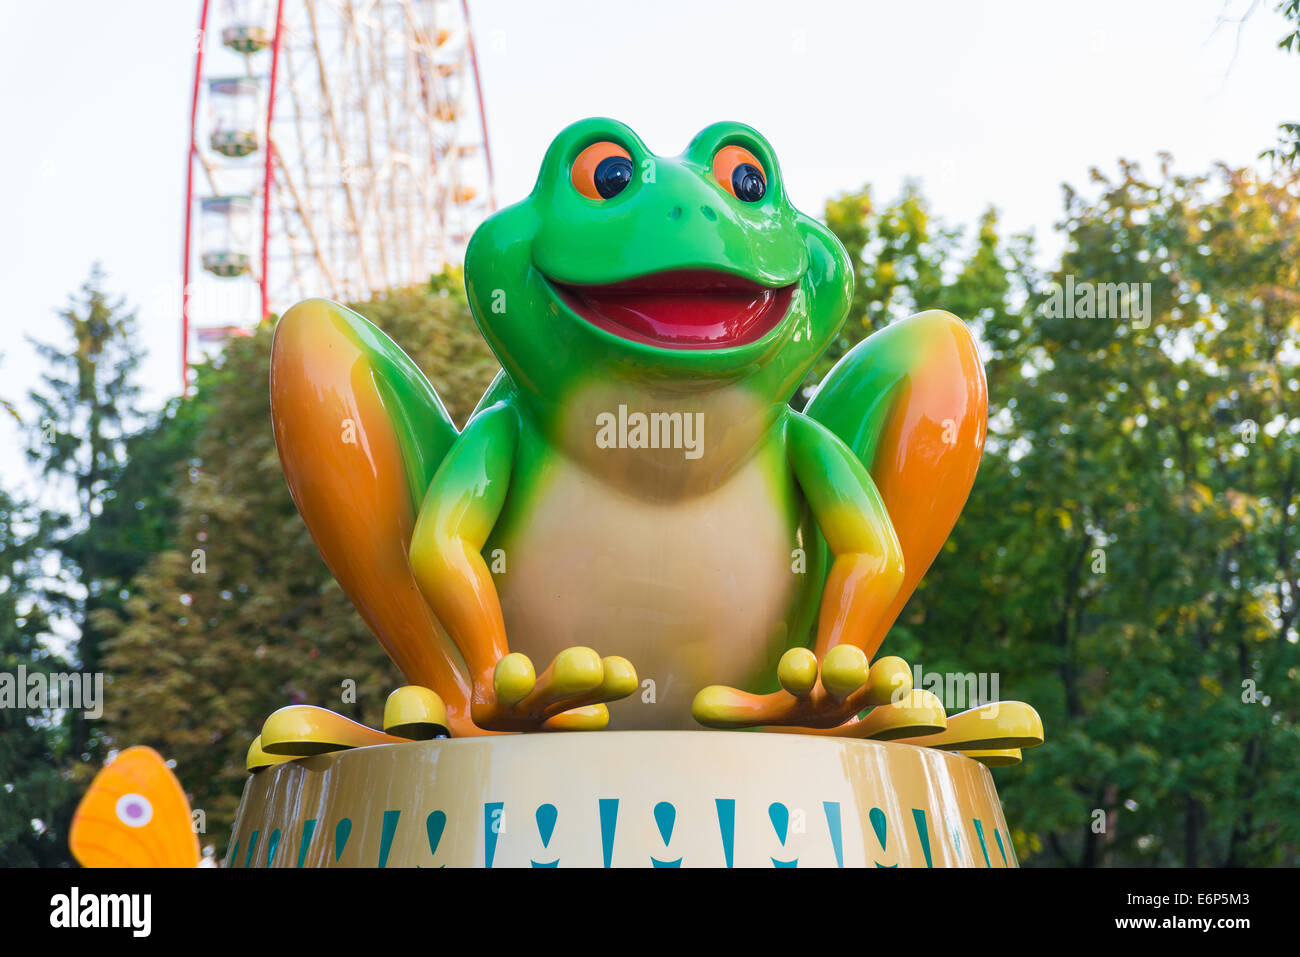 Nice and coloured frog in a kids park Stock Photo